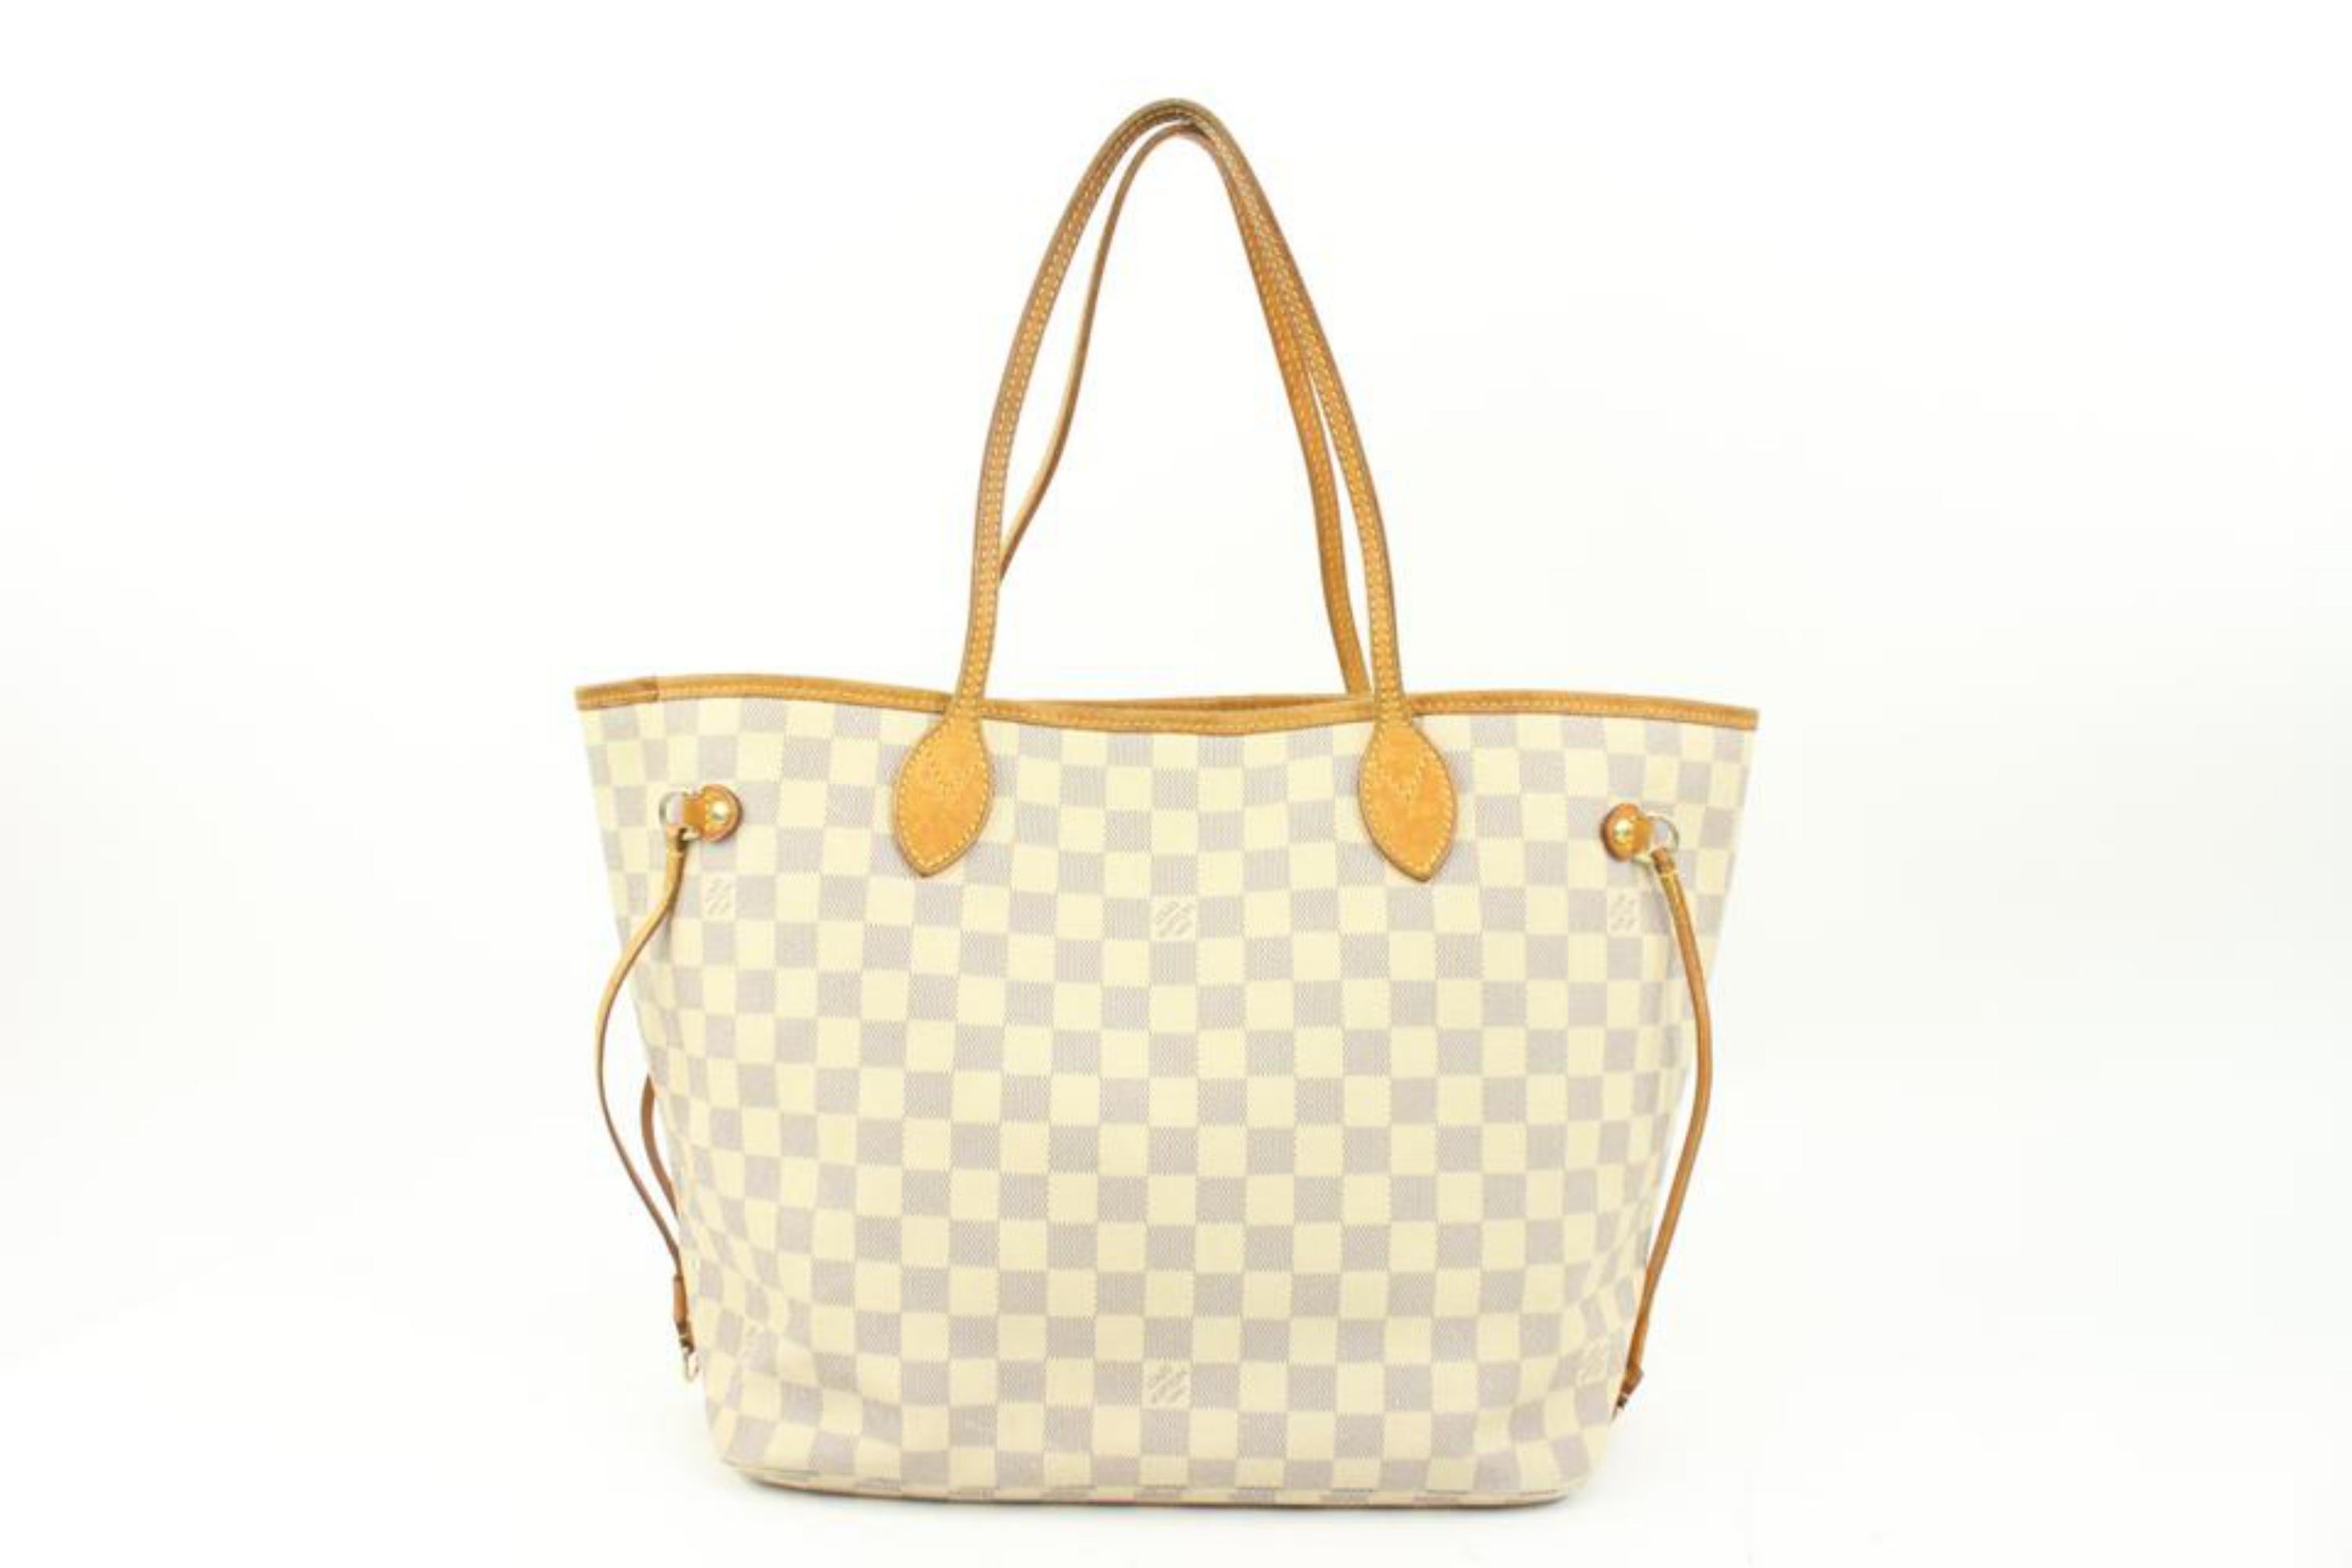 Louis Vuitton Damier Azur Neverfull MM Tote Bag 10lv216s In Fair Condition For Sale In Dix hills, NY